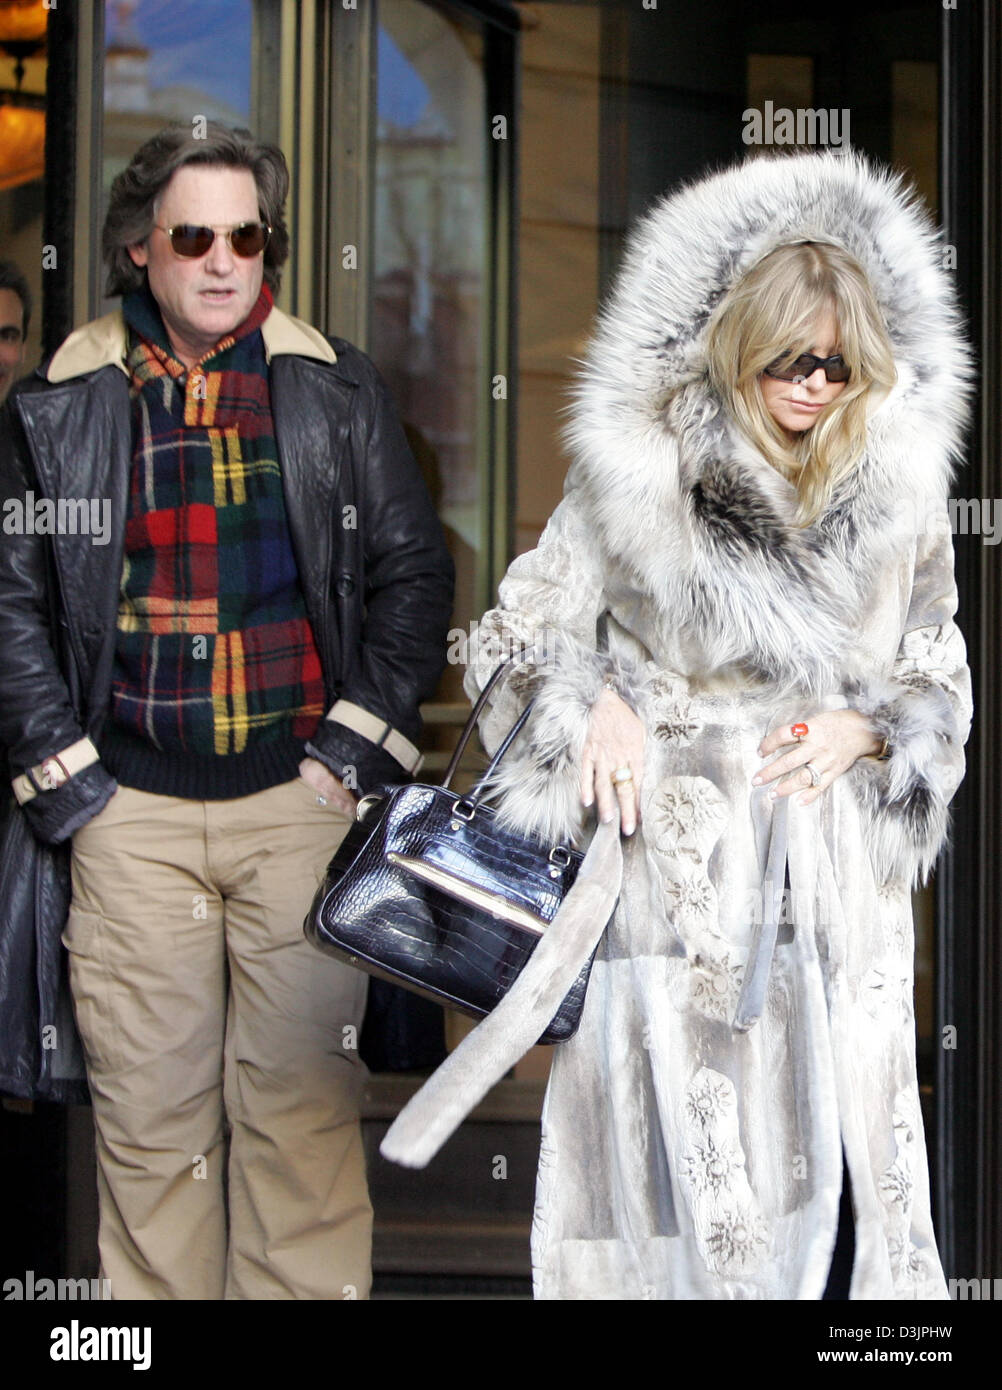 (dpa) - US actress Goldie Hawn (R) and her husband and fellow actor Kurt Russell leave the Hotel Adlon in Berlin, Germany, 8 February 2005. Hawn will be presented with the 'Goldene Kamera' award on 9 February 2005 in the German capital. Stock Photo